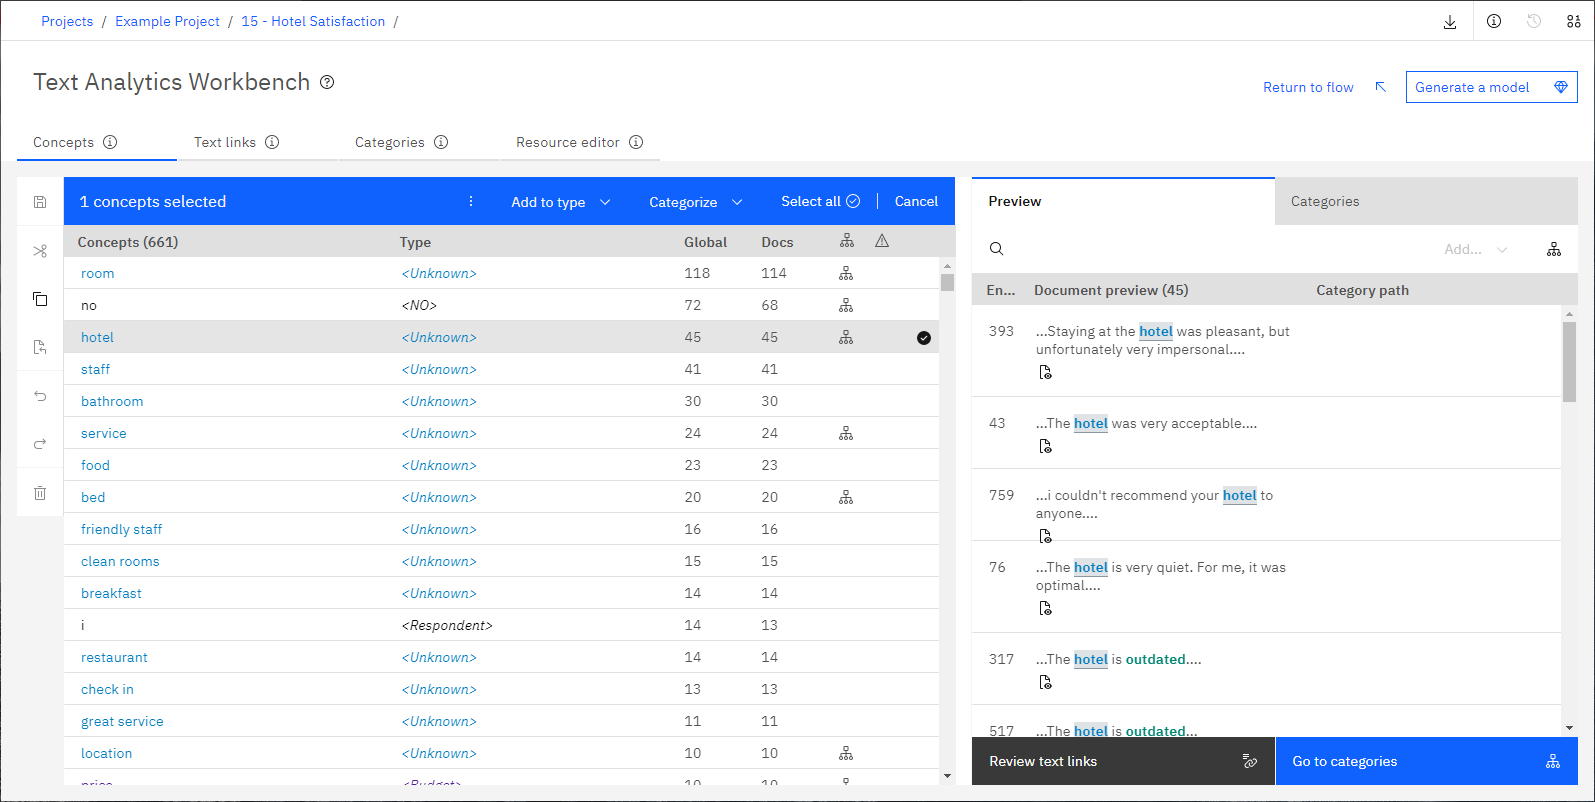 Screen capture of the Text Analytics Workbench.